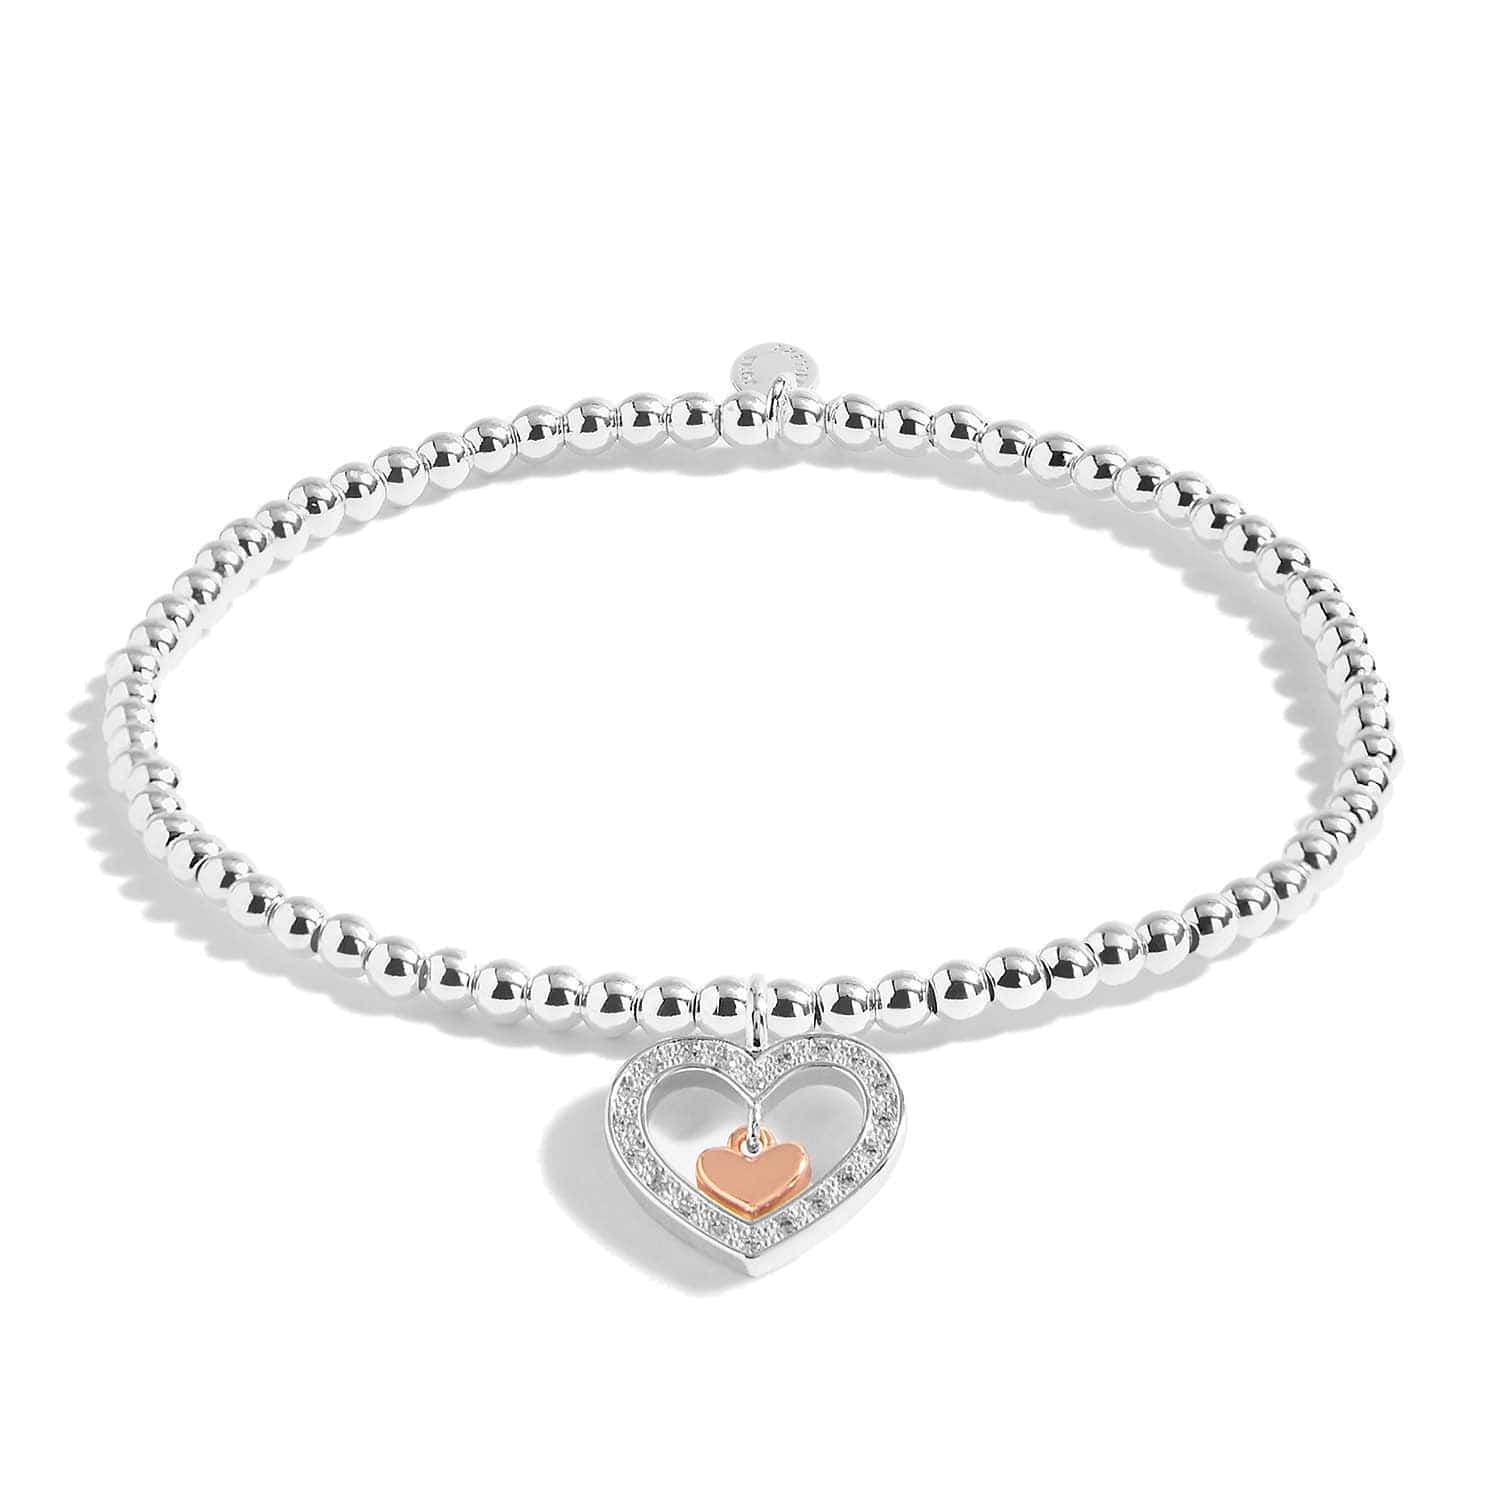 Joma Jewellery Bracelets Joma Jewellery Bracelet - A little Happy Valentine's Day